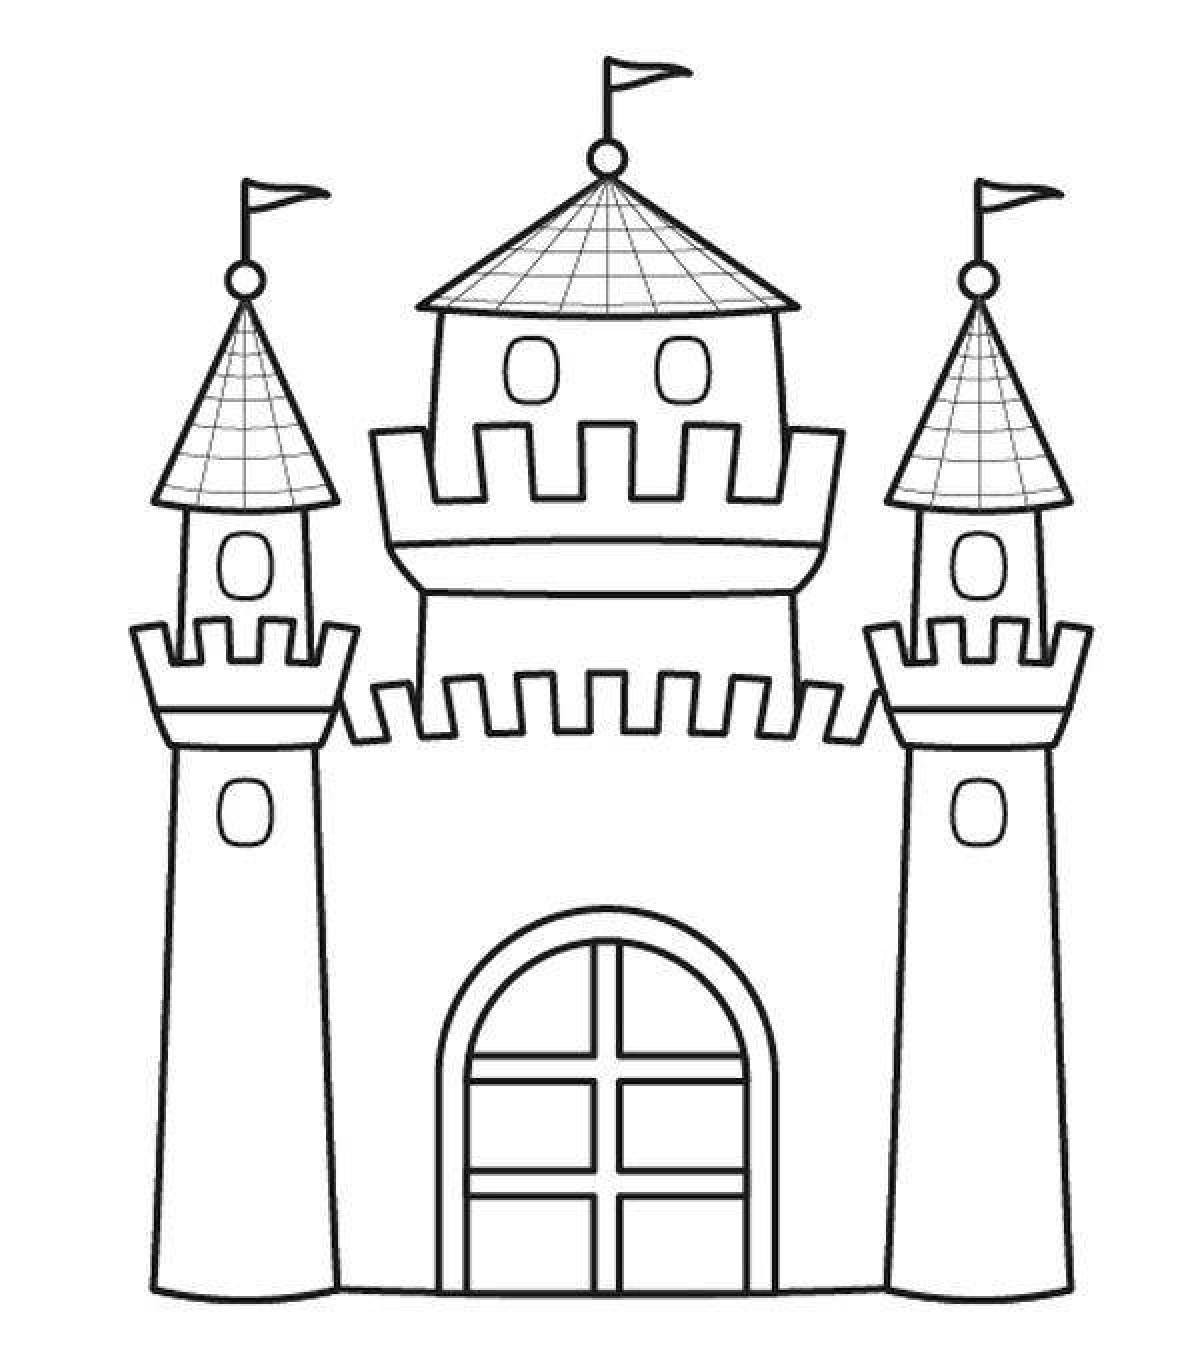 Wonderful coloring drawing of a fairytale palace